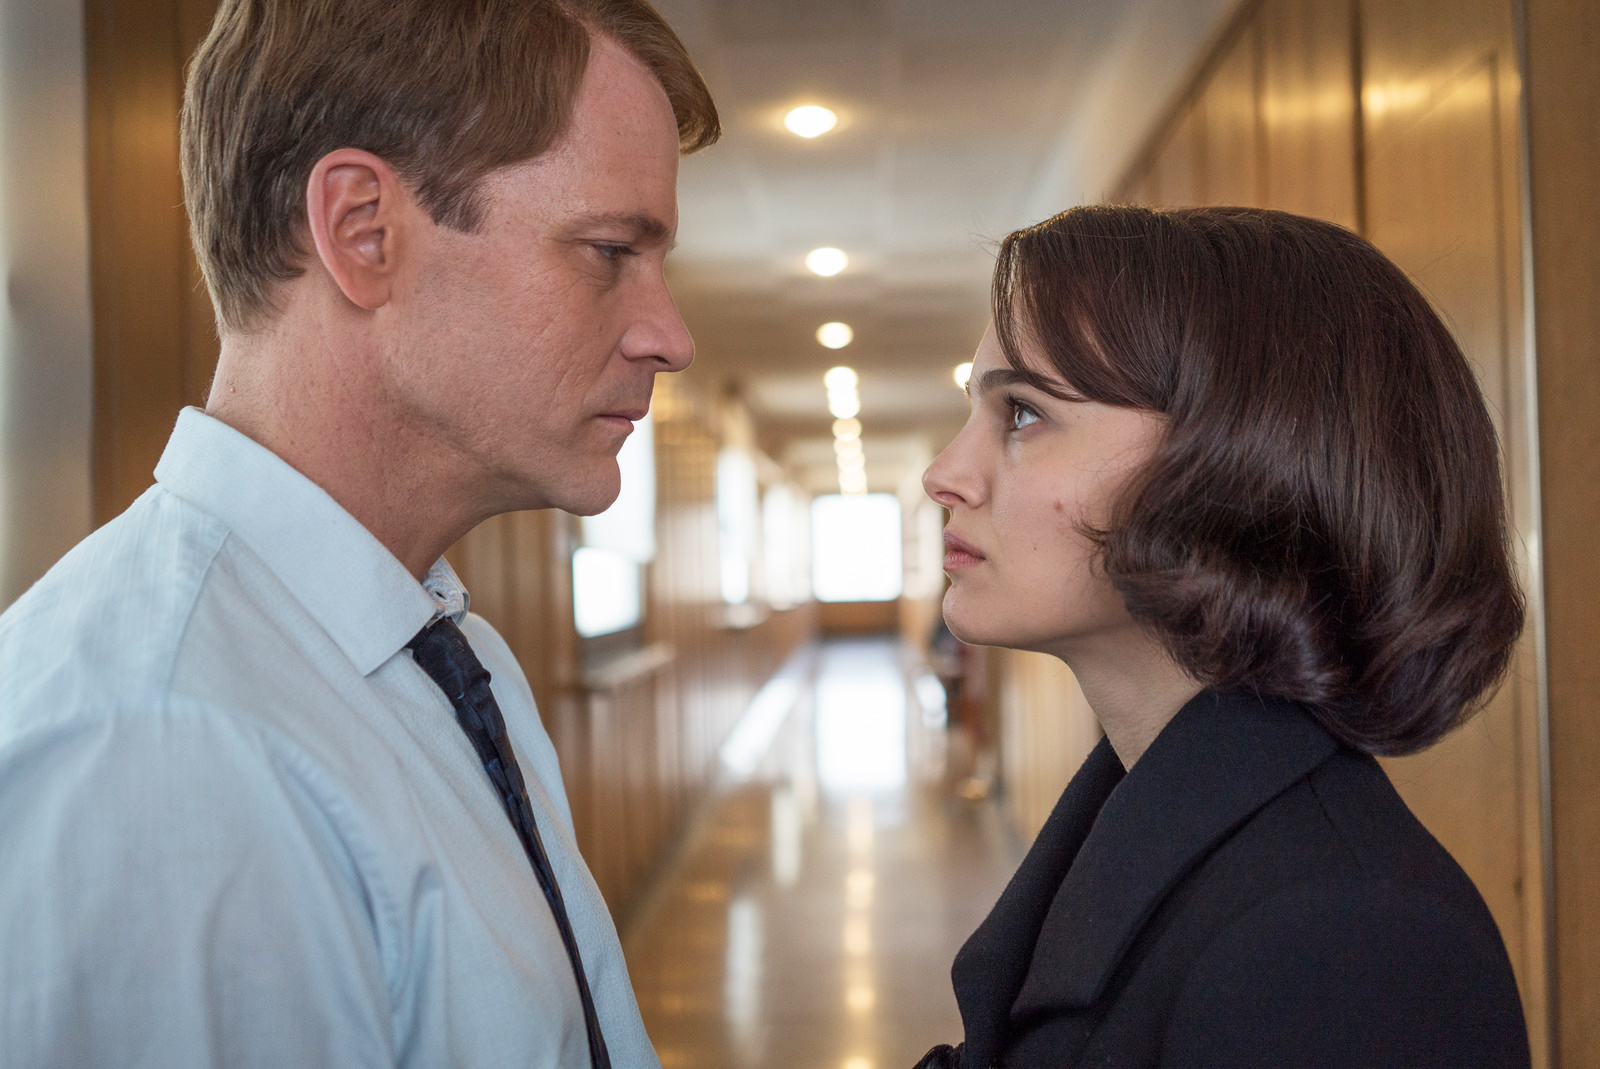 Peter Sarsgaard as Bobby Kennedy and Natalie Portman as Jackie Kennedy.